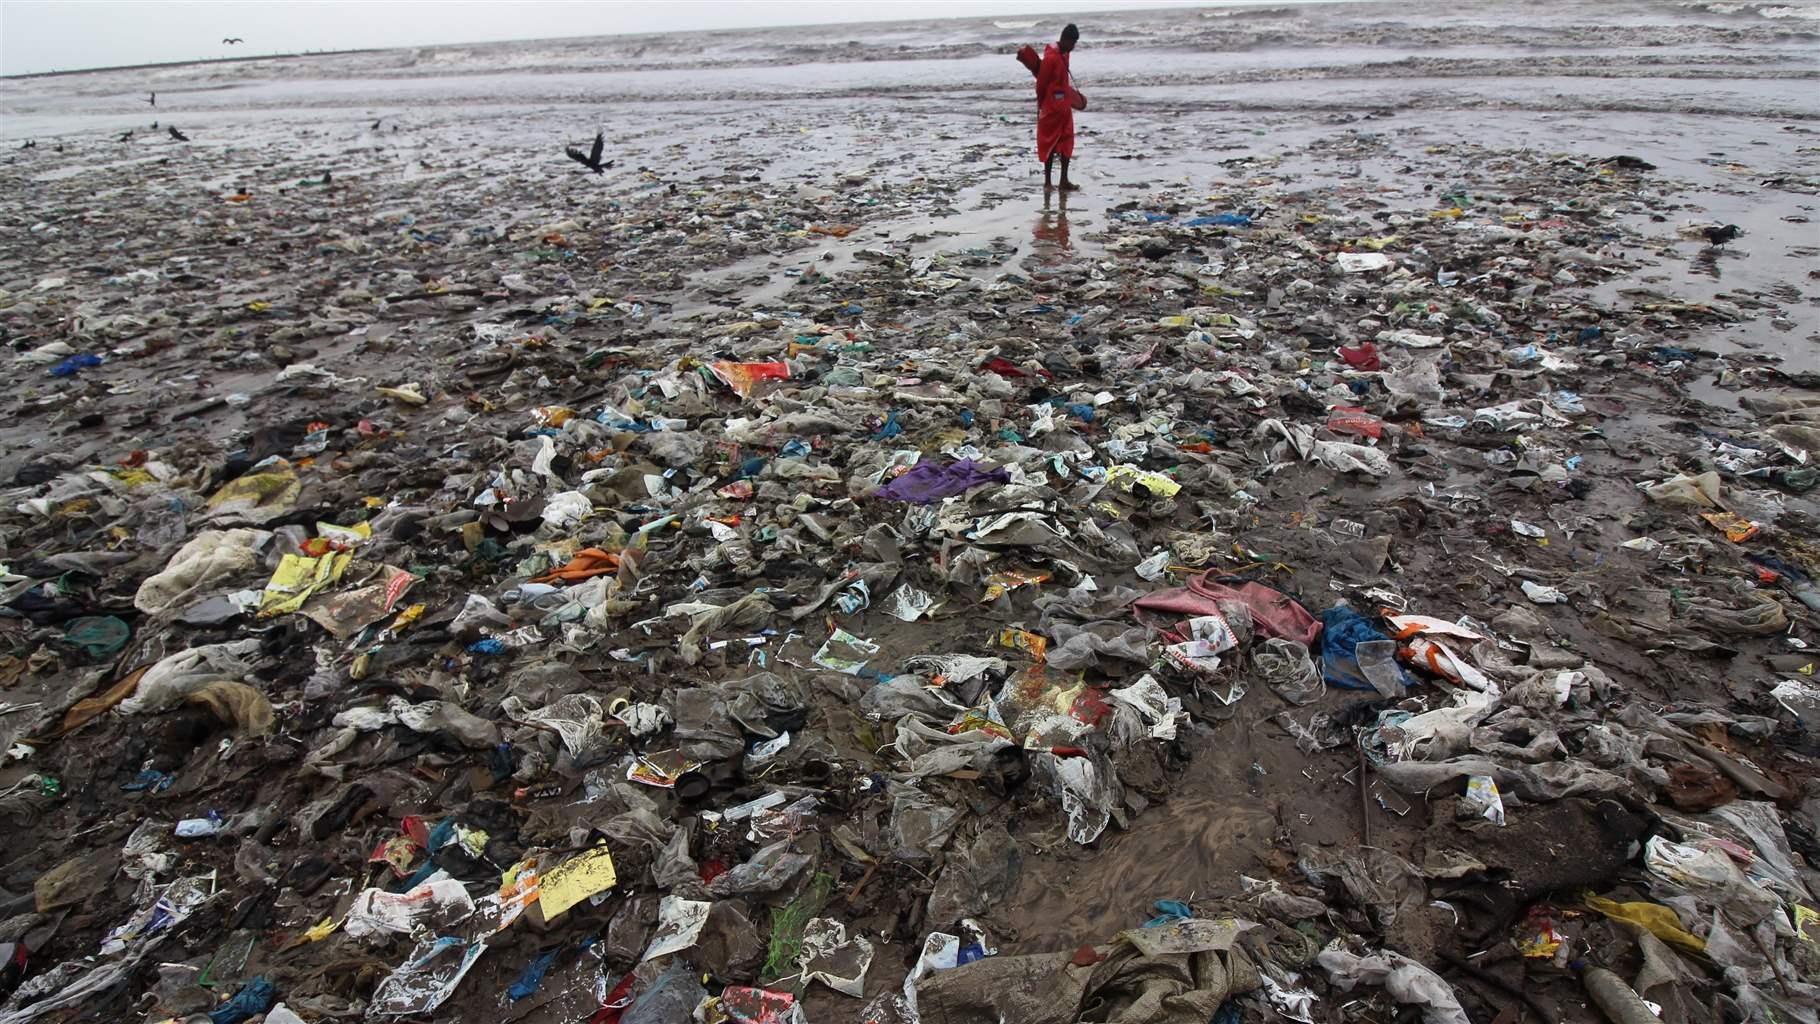 Science Study Shows That Nearly 80% of the Annual Plastic Flow Into the Environment Can Be Stopped Using Existing Technology. The Pew Charitable Trusts